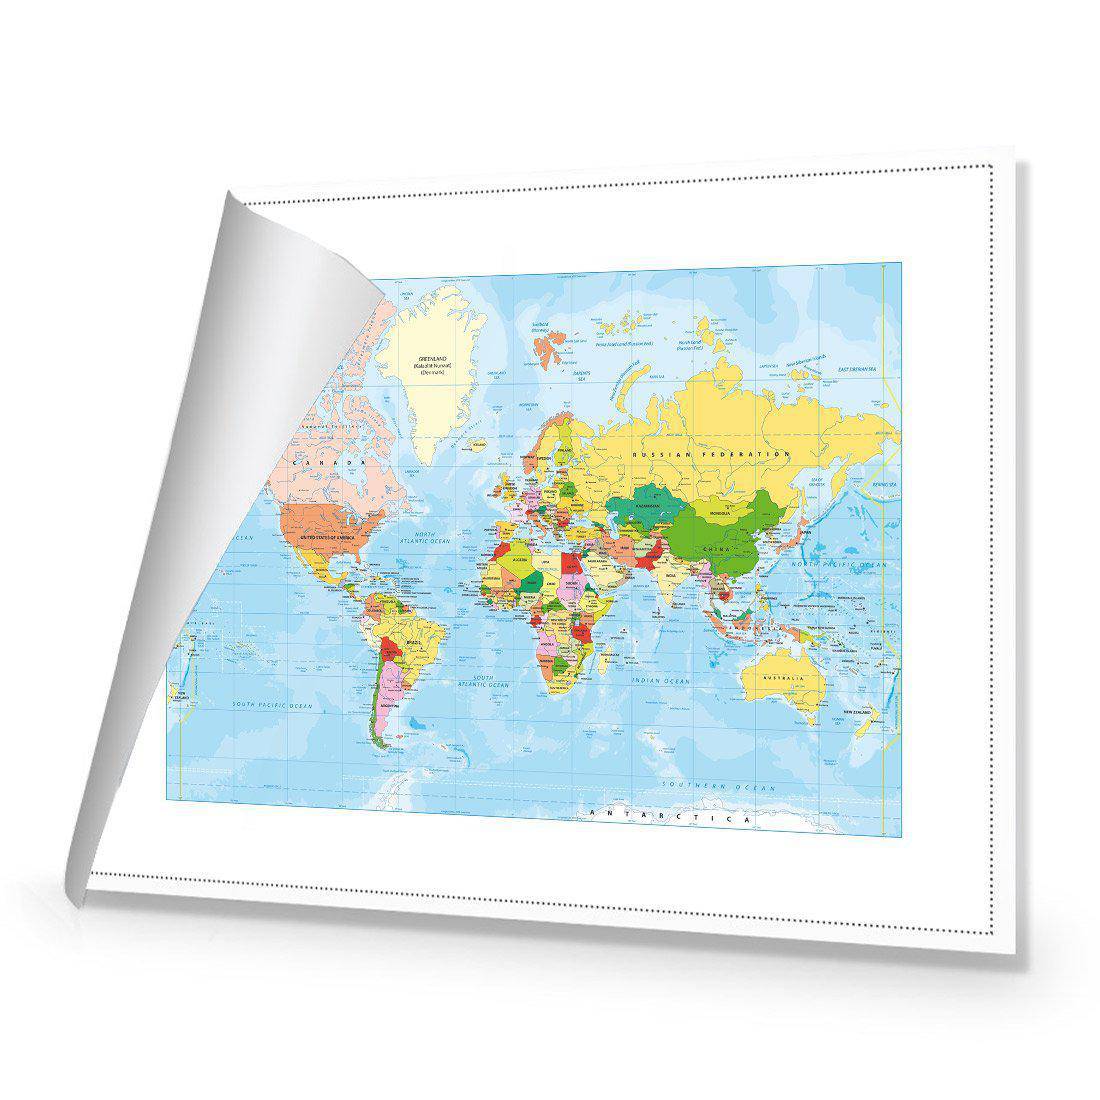 Political Map of the World Canvas Art-Canvas-Wall Art Designs-45x30cm-Rolled Canvas-Wall Art Designs